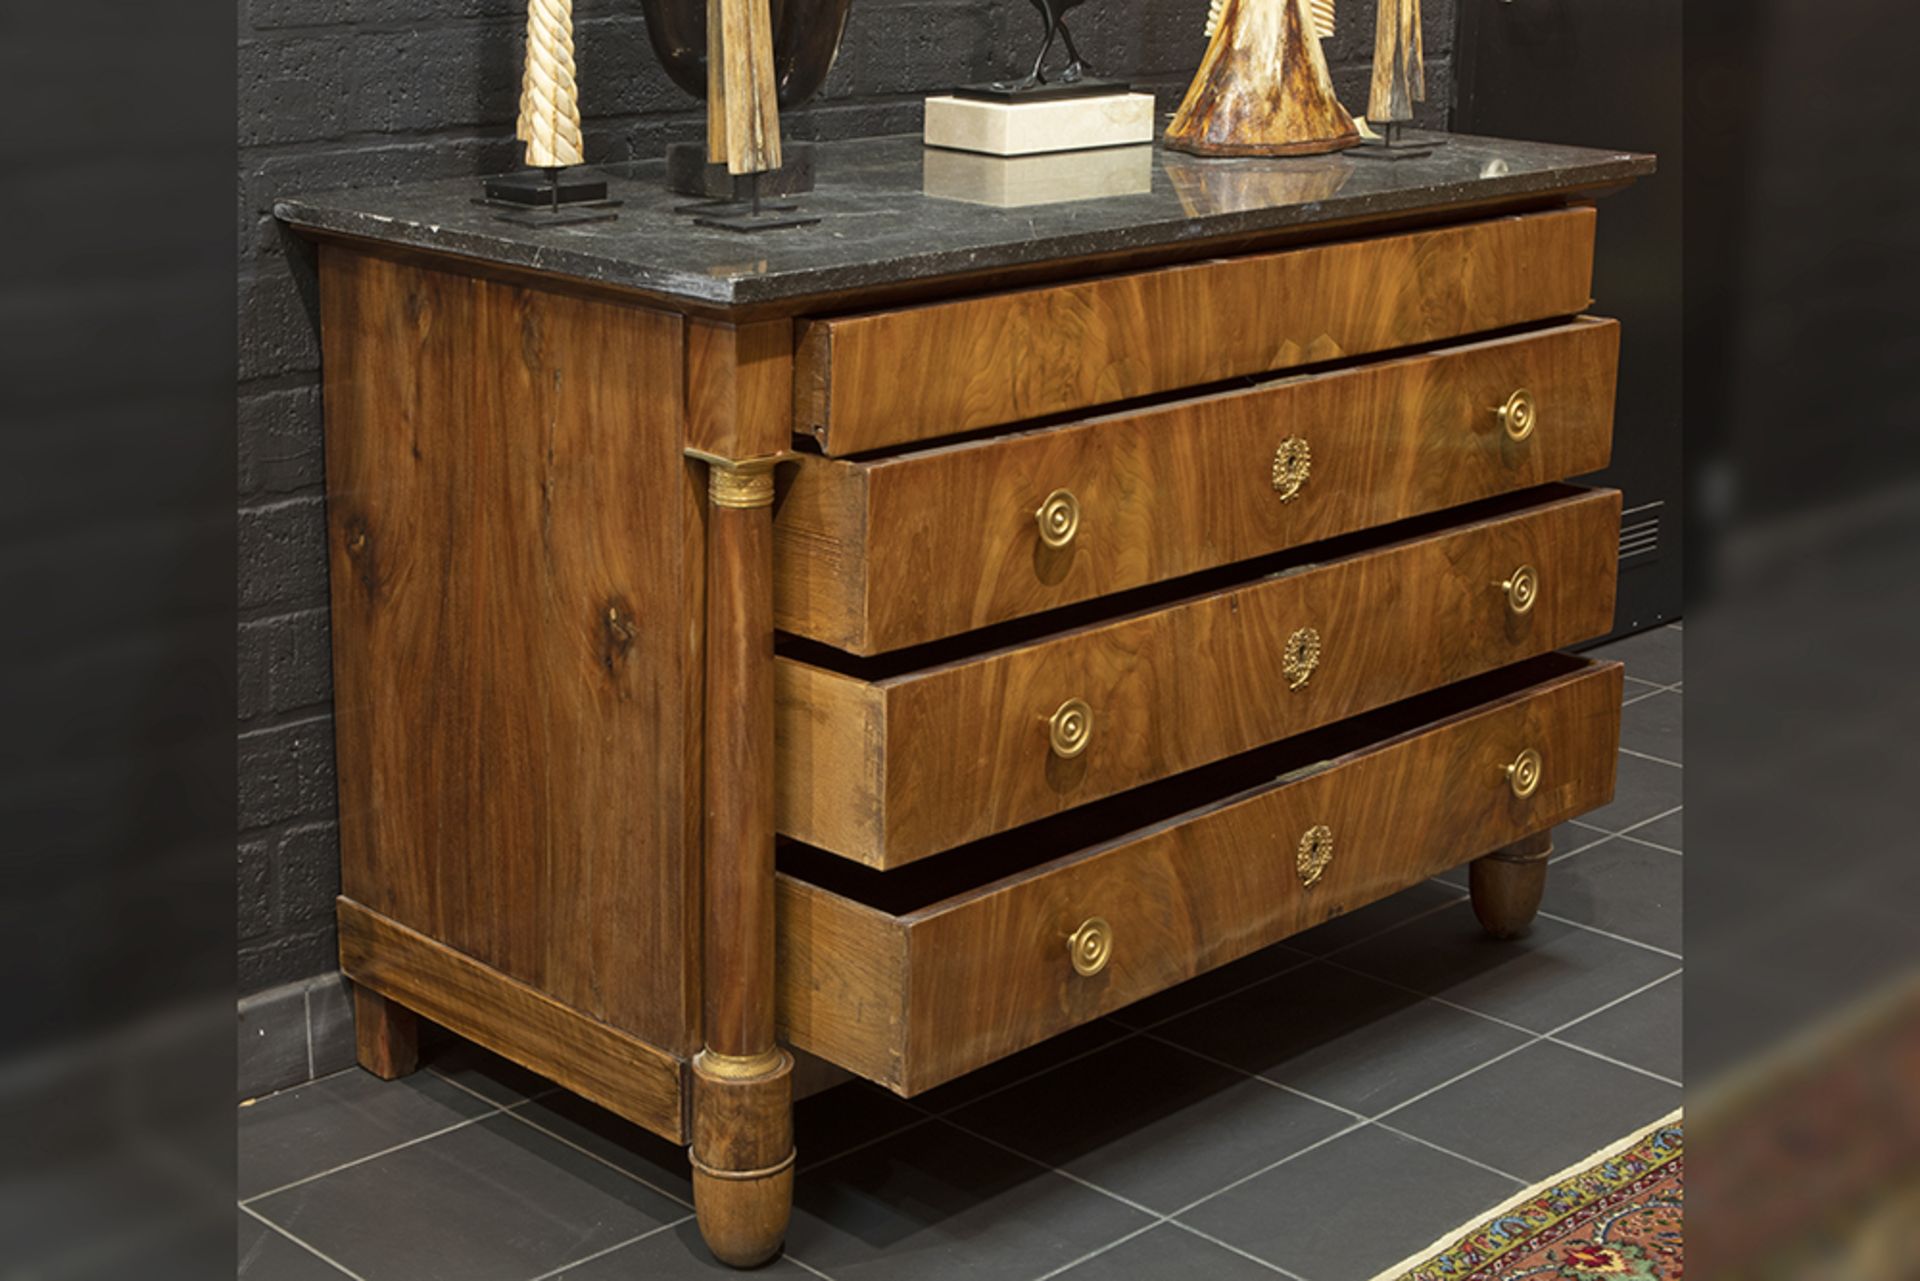 early 19th Cent. French Empire period chest of drawers in mahogany with mountings in gilded bronze - Image 2 of 2